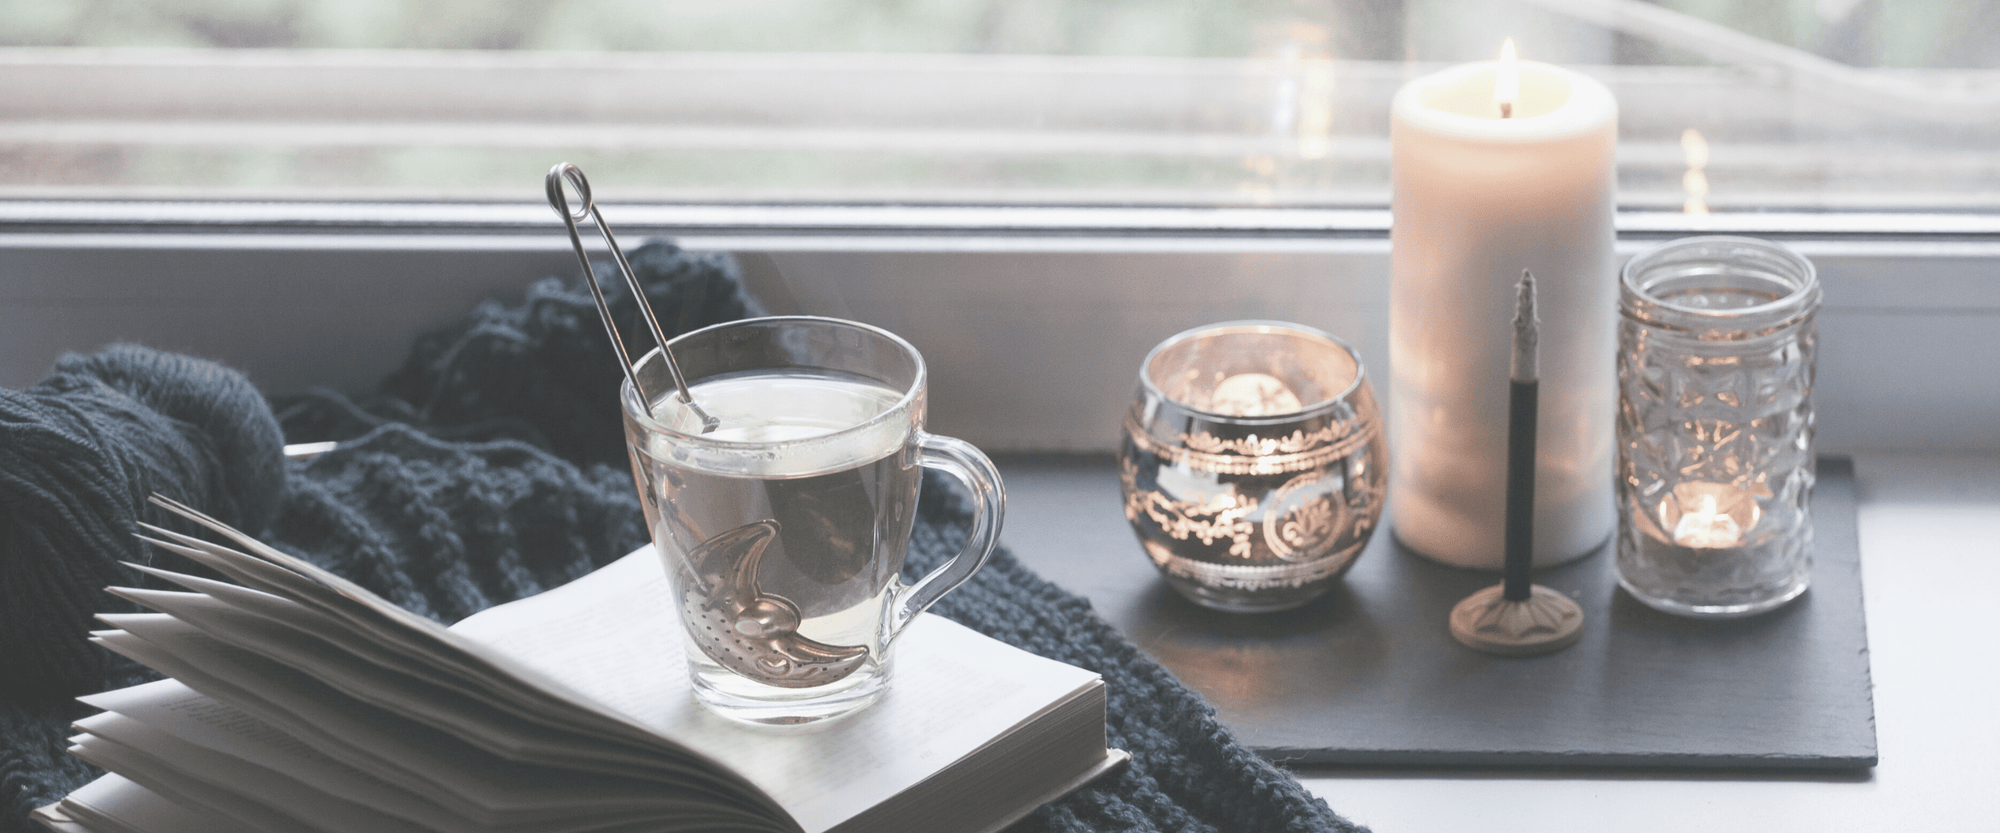 peaceful home setting with incense and essential oil candles by nefertem